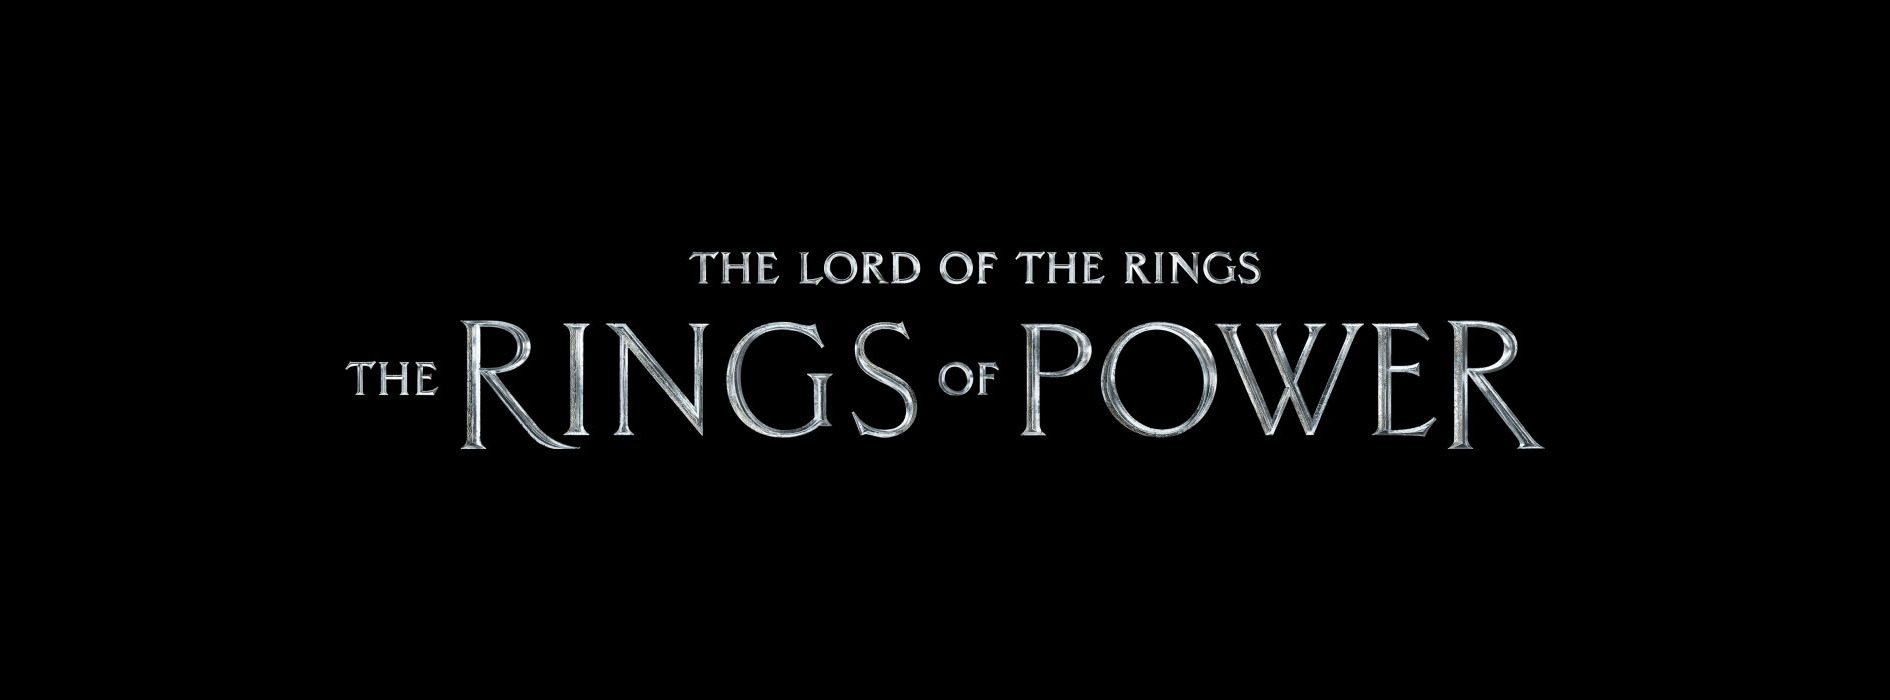 The Lord of the Rings: The Rings of Power' Official Trailer